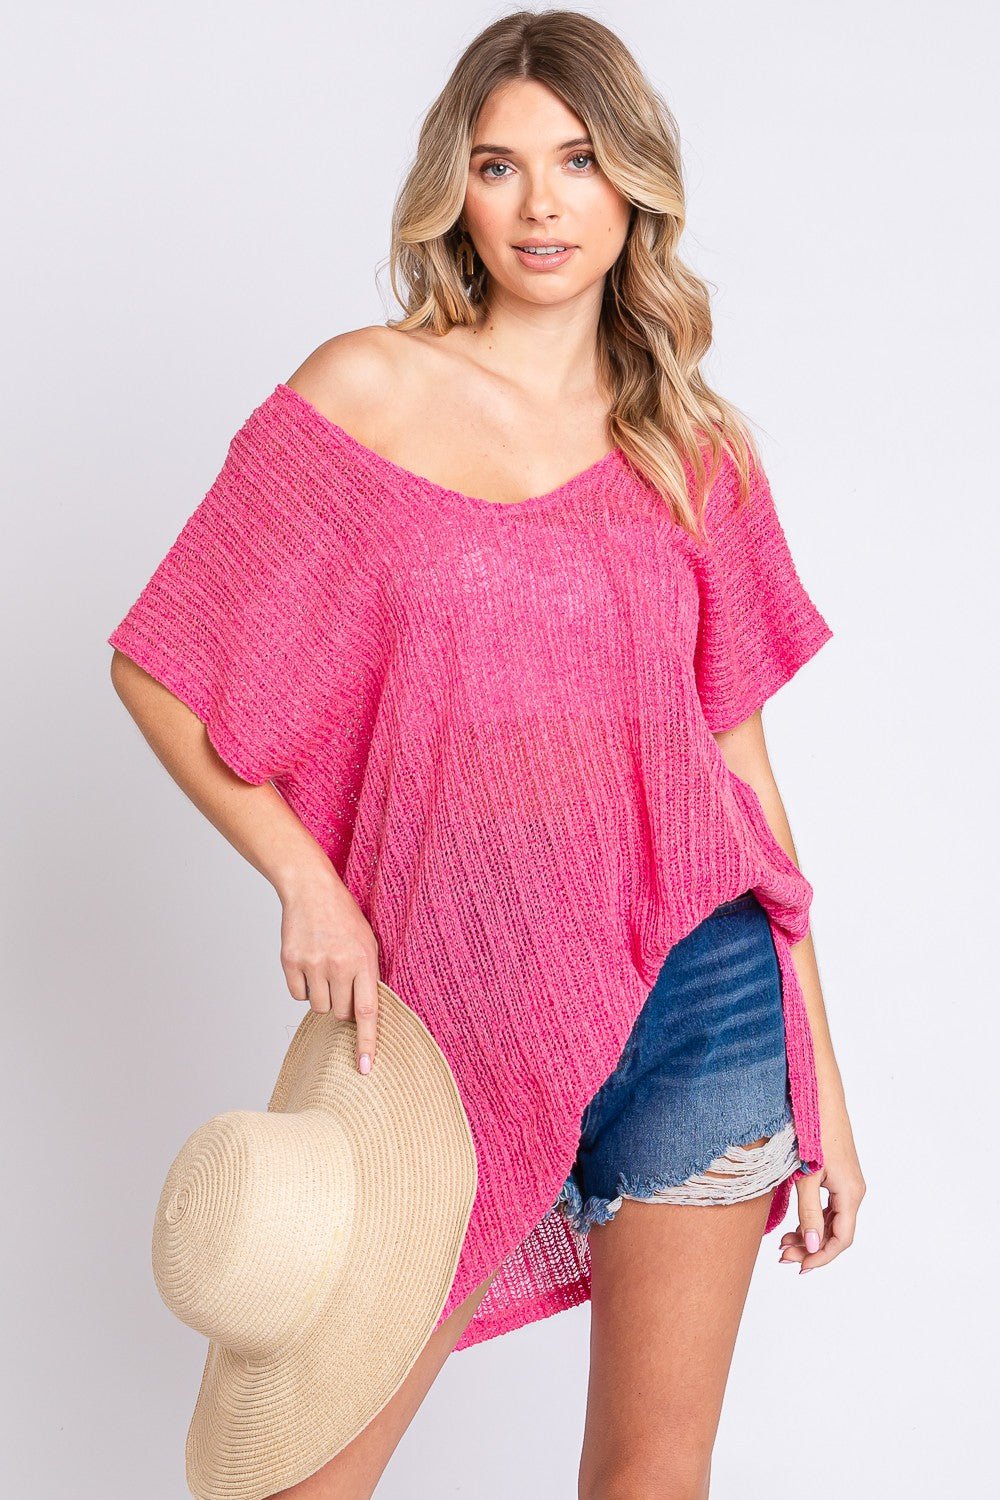 Short Sleeve Knit Cover Up in Hot PinkCover-UpGeeGee